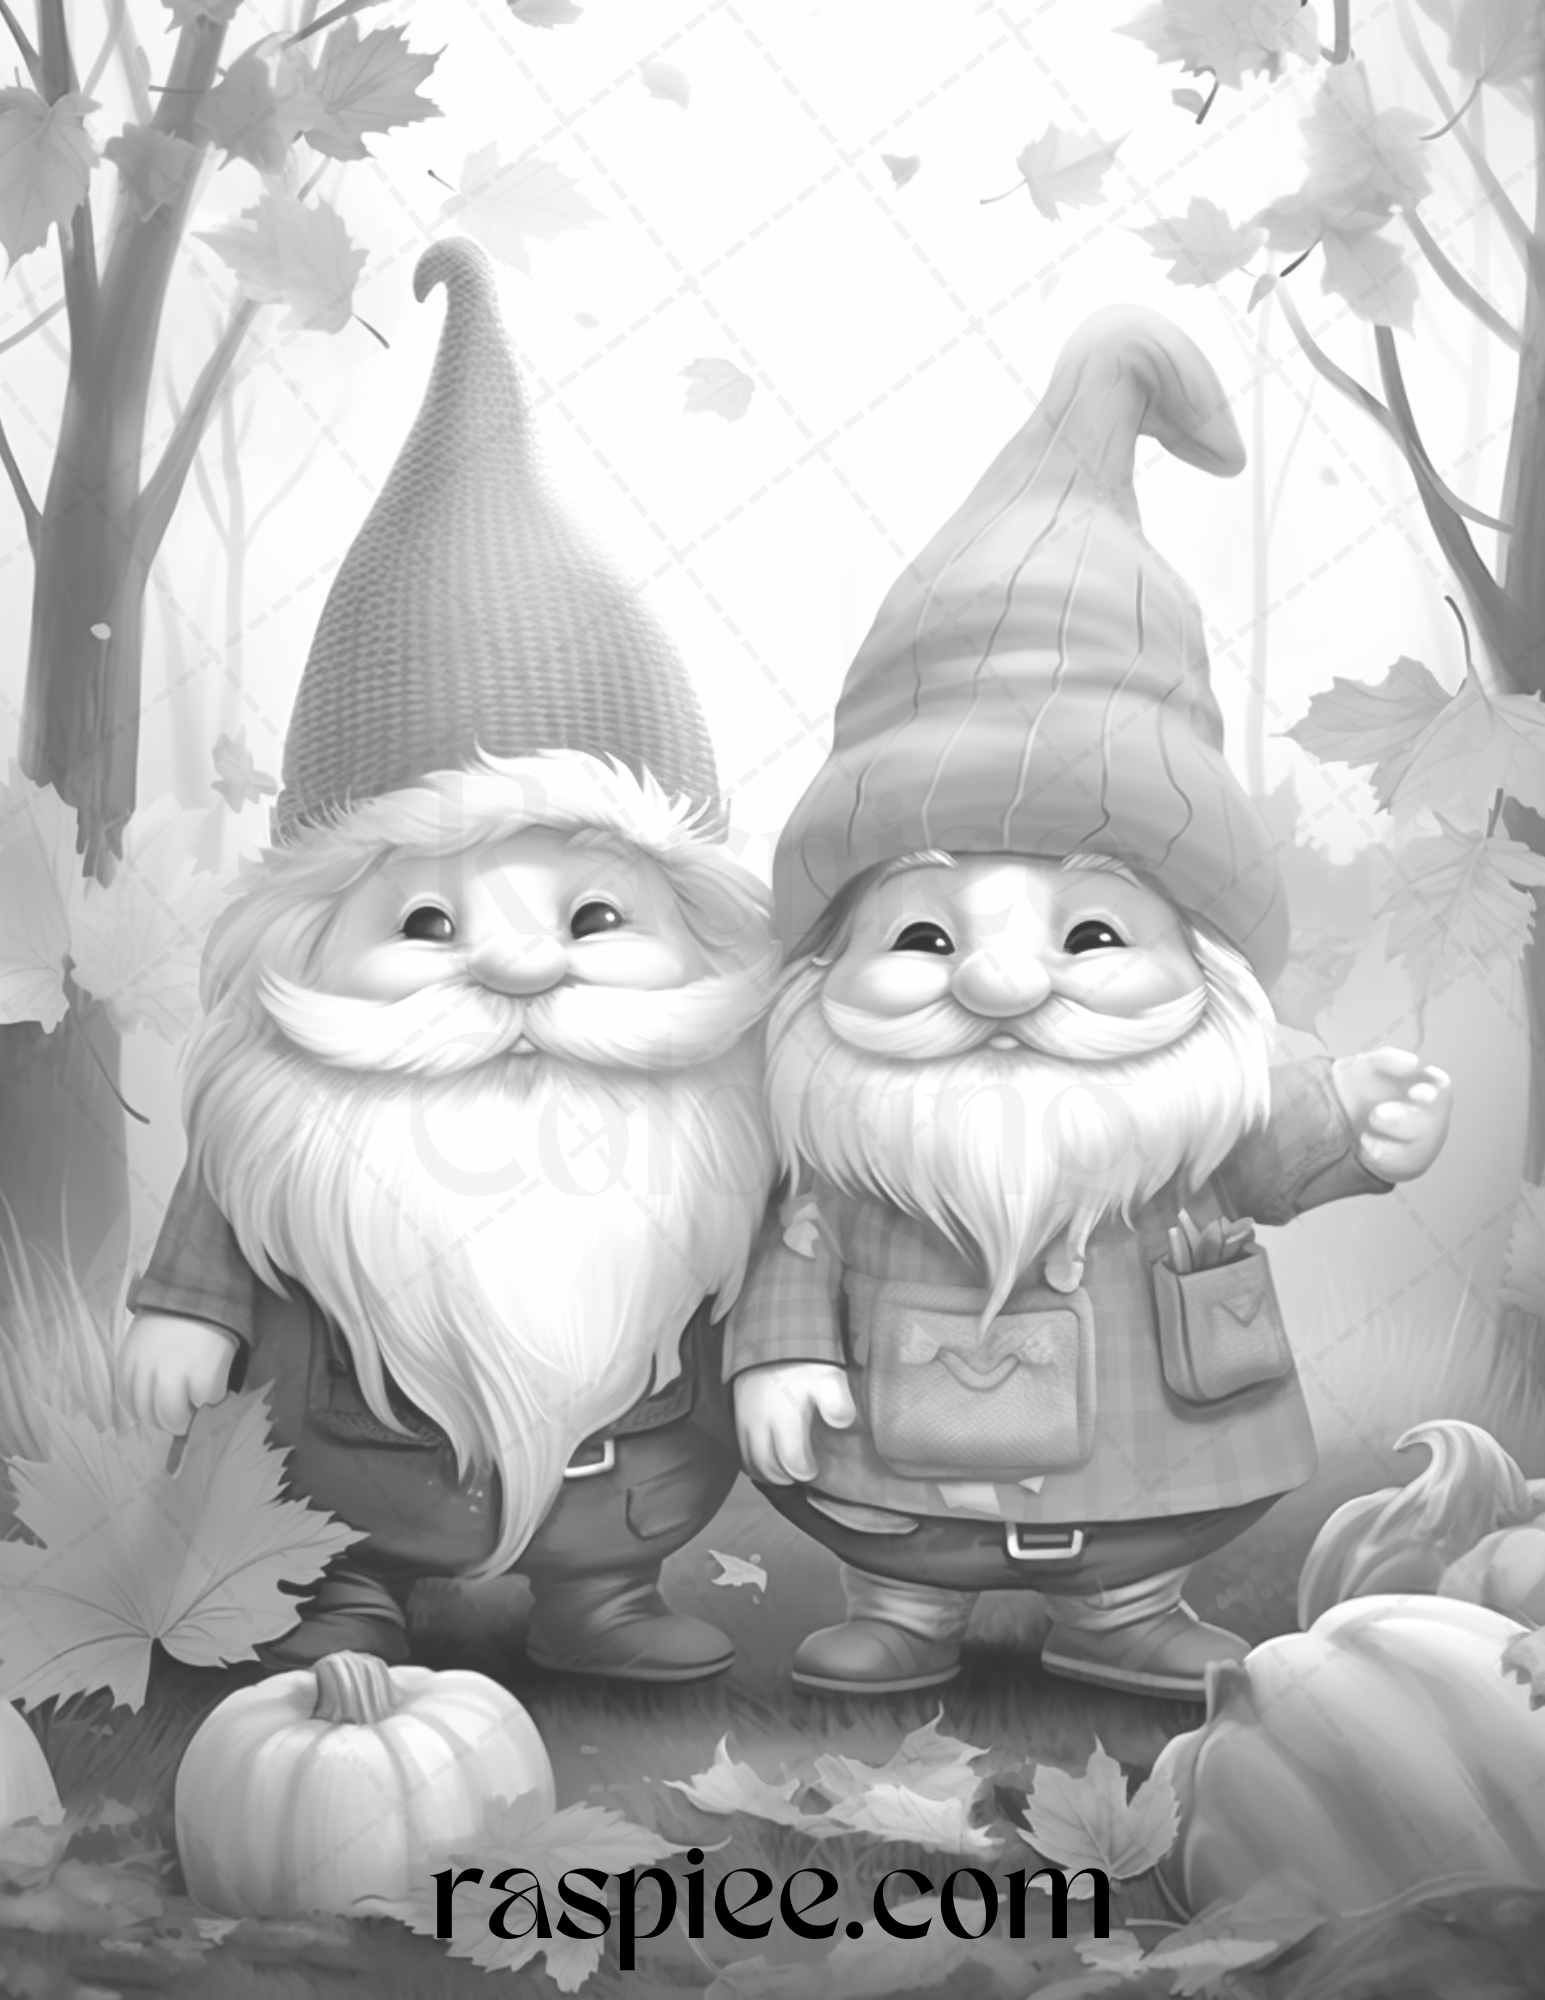 Fall Gnomes Grayscale Coloring Pages, Printable Coloring Sheets for Adults and Kids, Autumn Theme Coloring Fun, Whimsical Characters Coloring, Seasonal Decor DIY Crafts